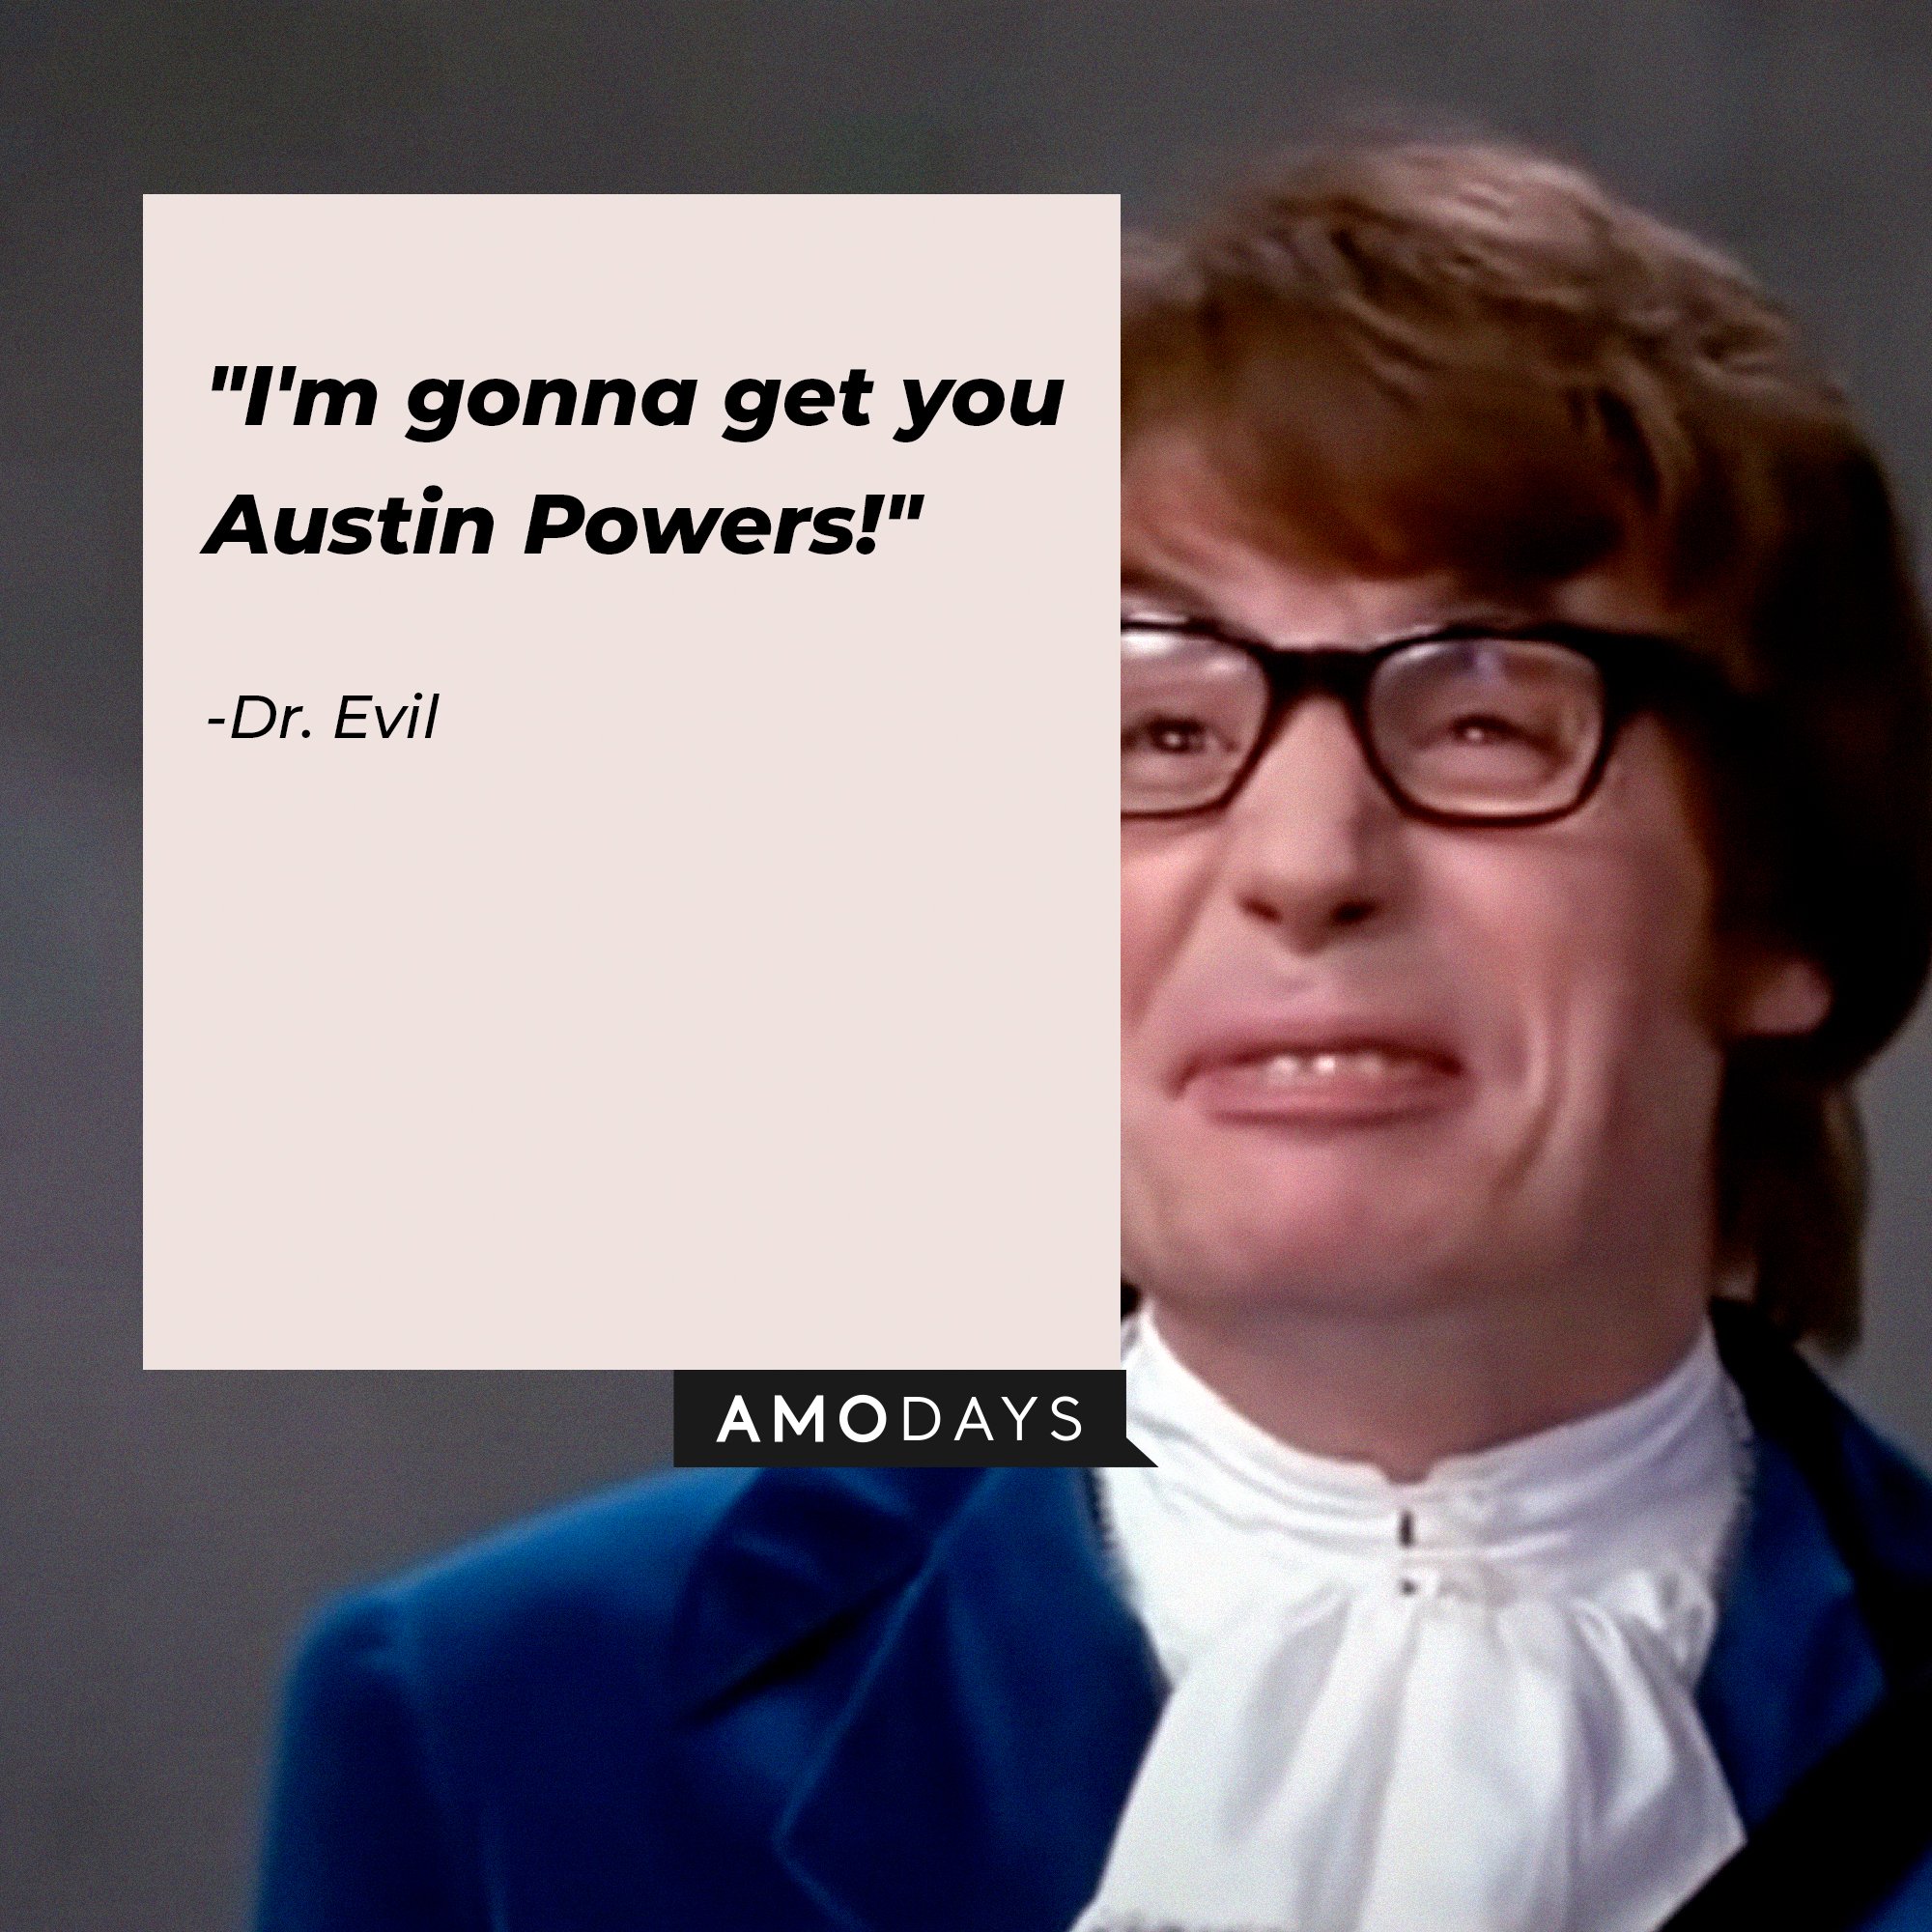   Dr. Evil’s quote: "I'm gonna get you Austin Powers!" | Image: Amodays